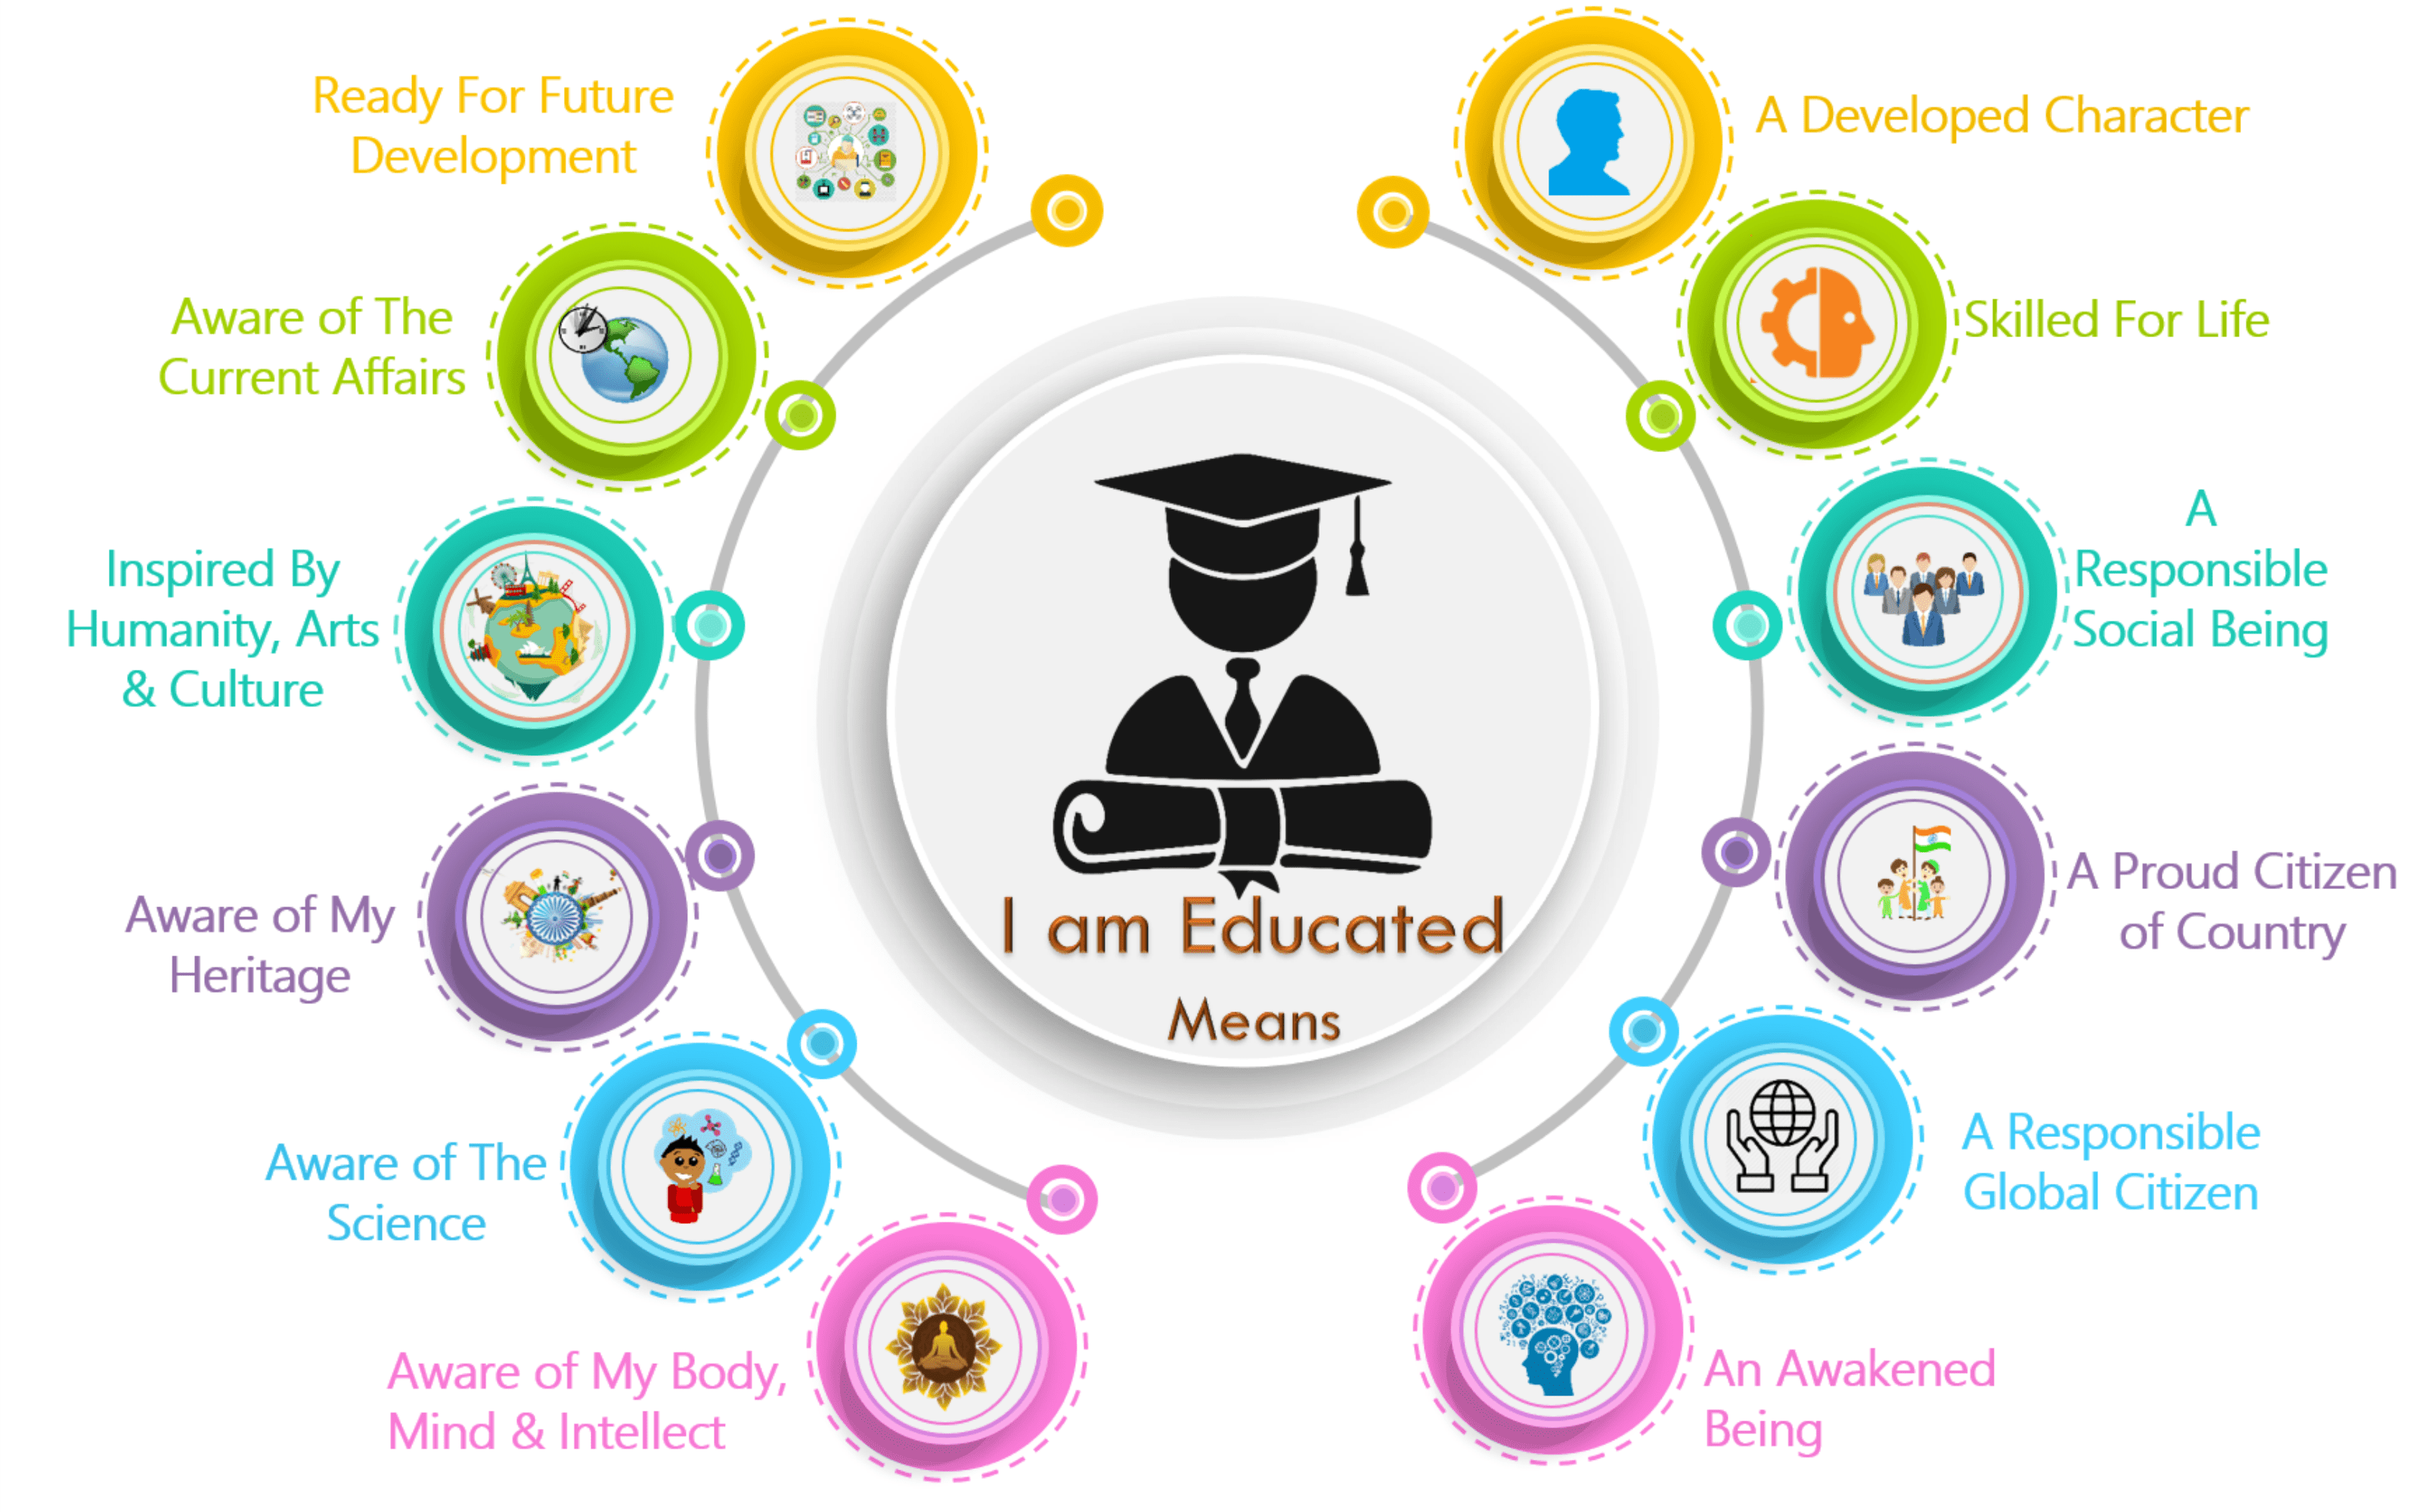 I am Educated Means